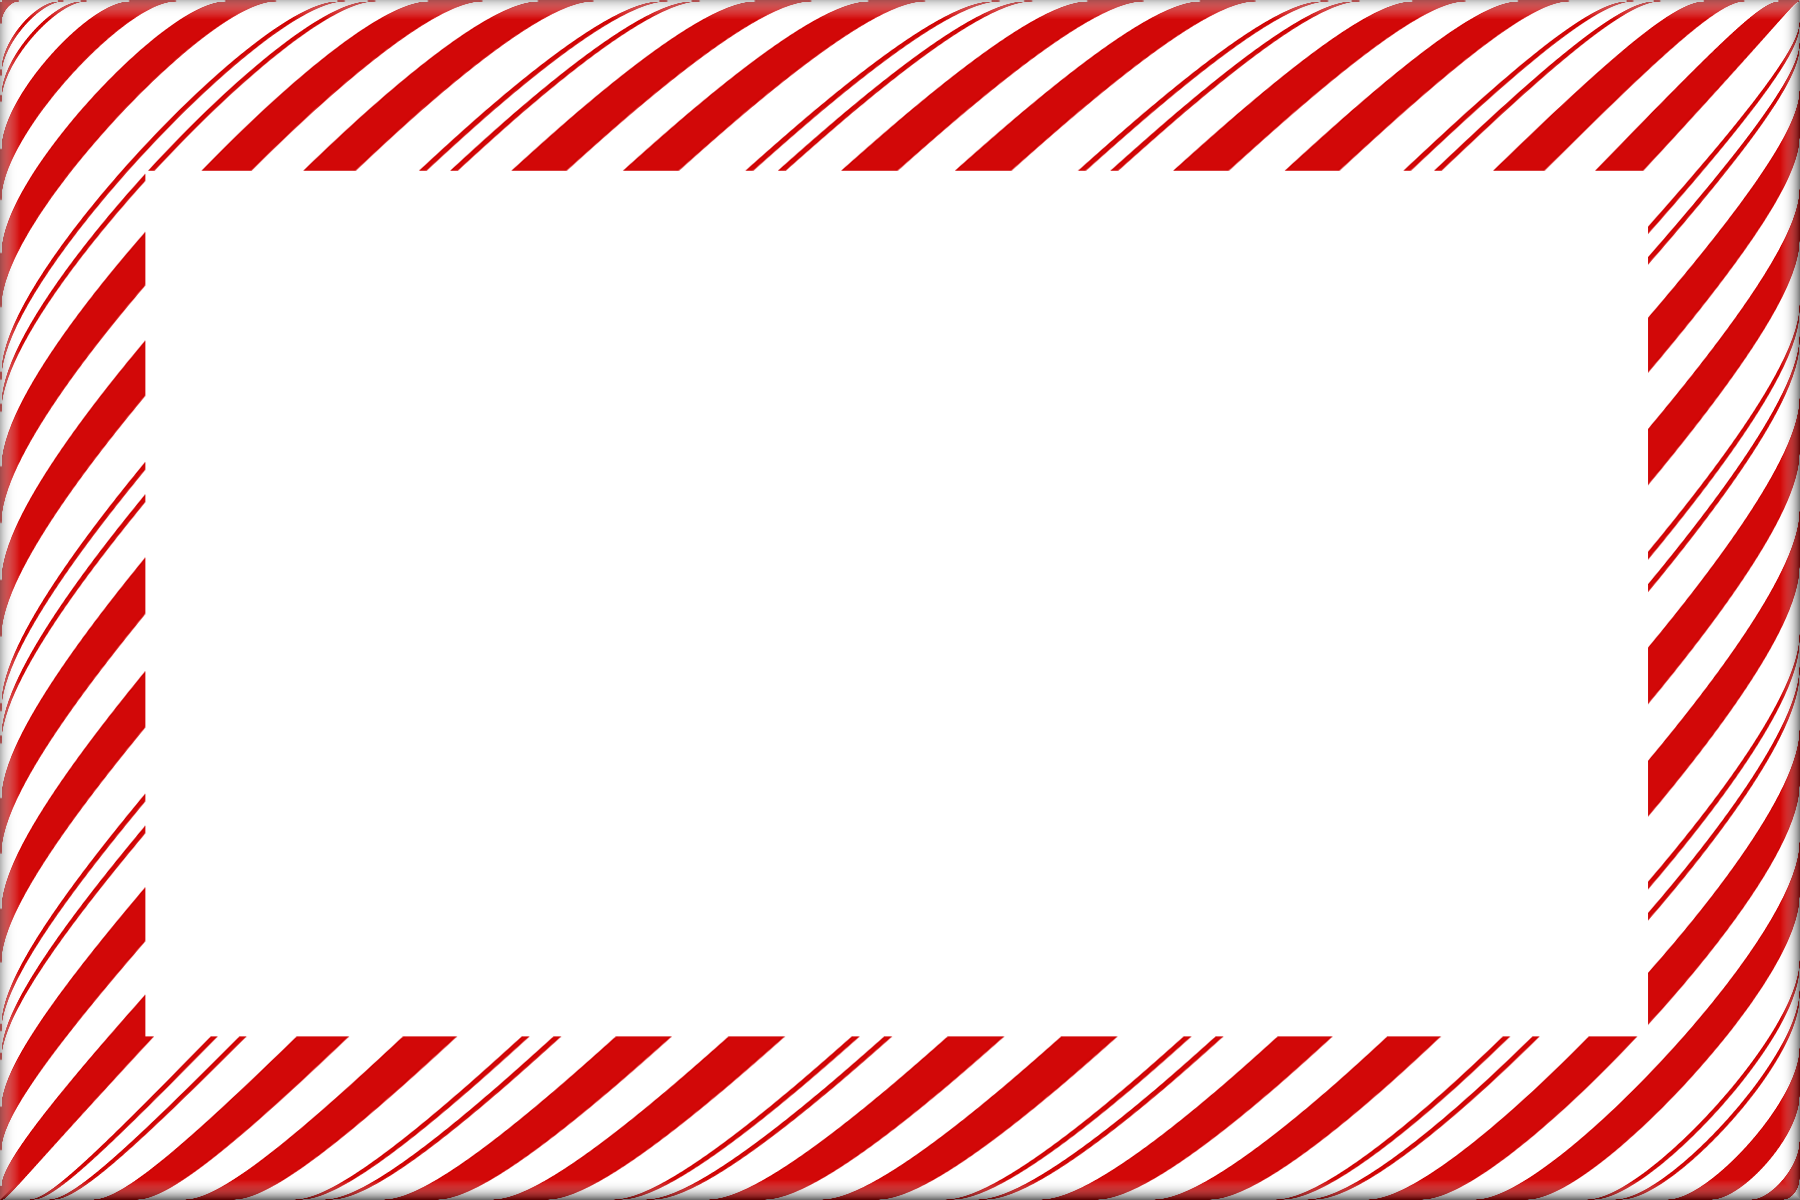 Candy Cane Christmas Borders And Frames - Candy Cane Stripe Border (1800x1200)